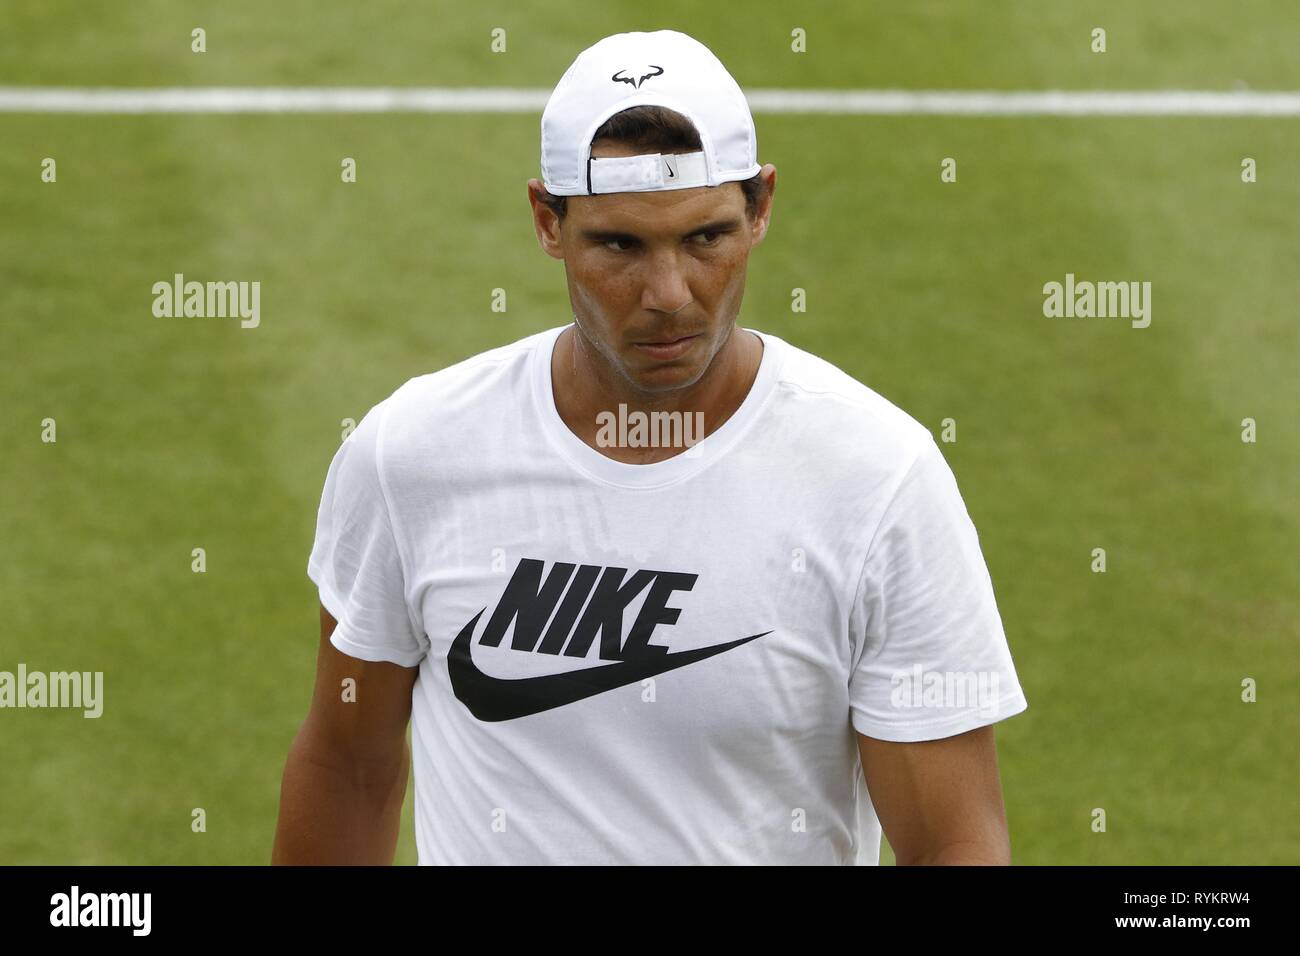 Rafael nadal portrait hi-res stock photography and images - Alamy